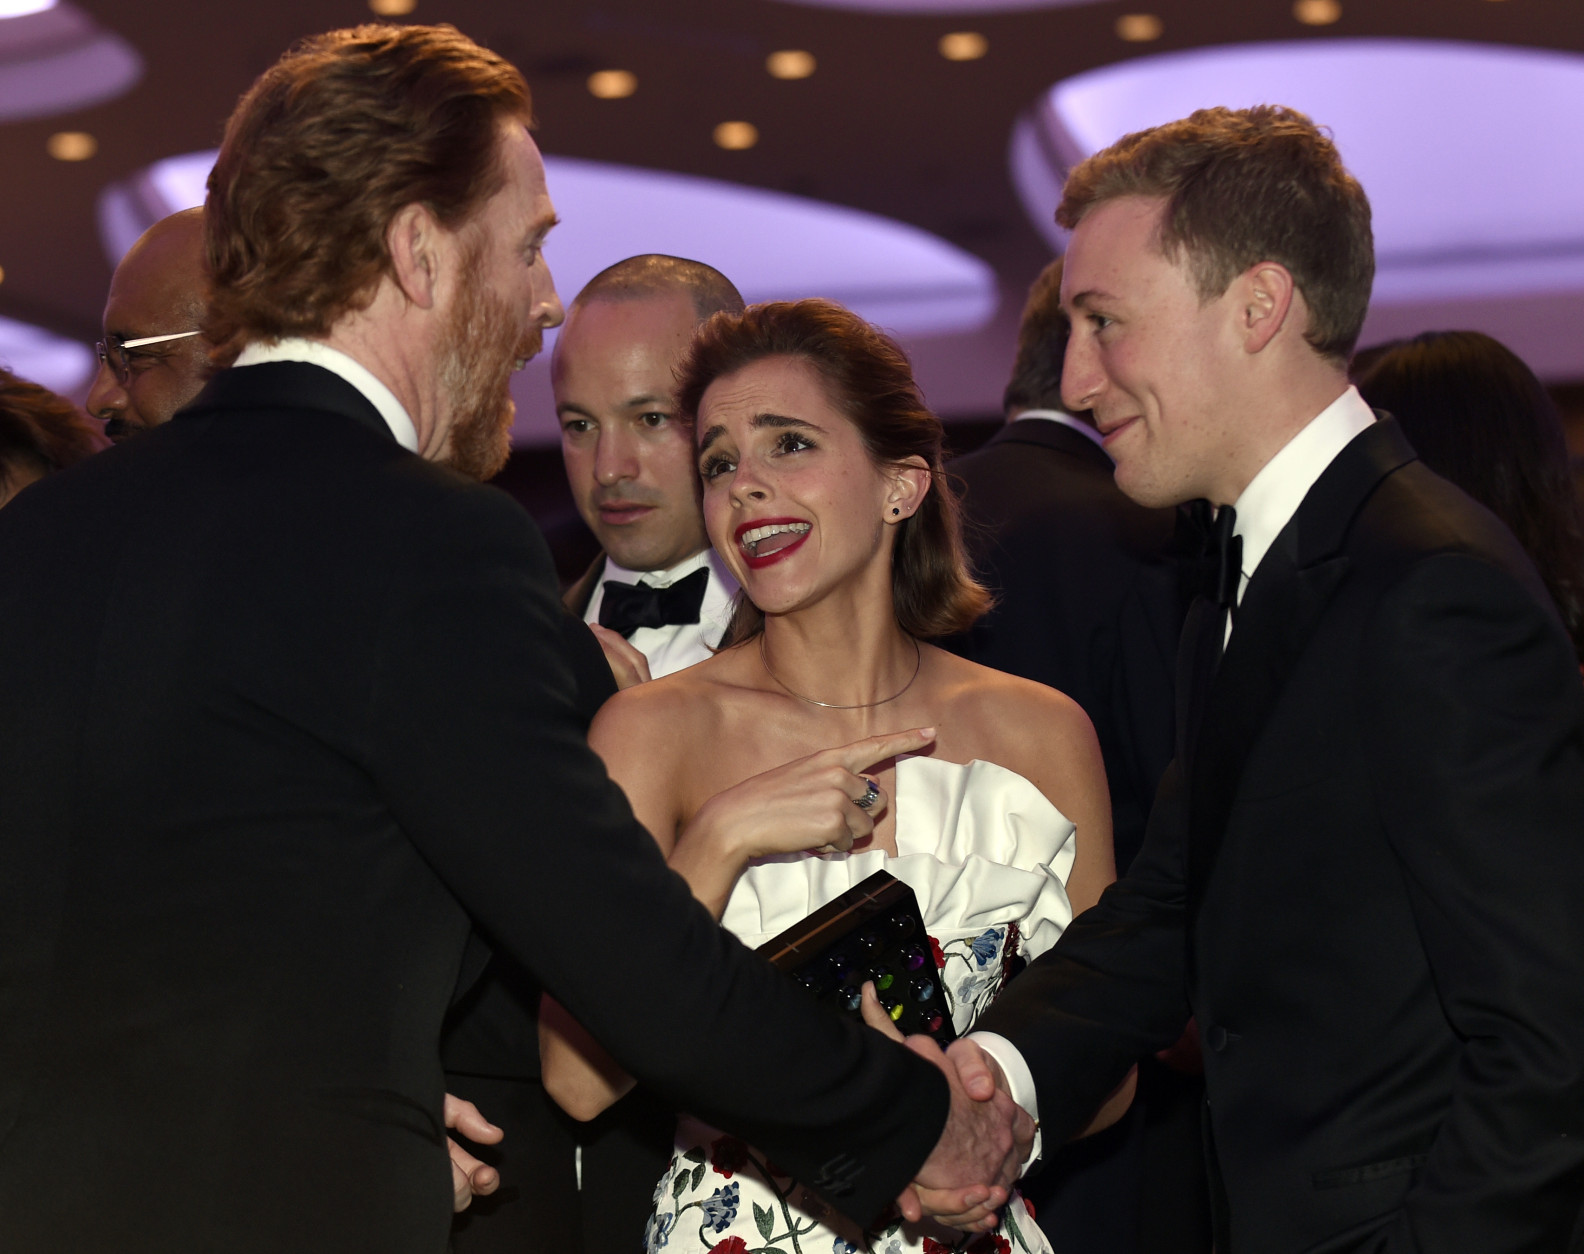 Actress Emma Watson, center, talks with Homeland actor Damian Lewis, left, at the annual White House Correspondents' Association dinner at the Washington Hilton, in Washington, Saturday, April 30, 2016. (AP Photo/Susan Walsh)